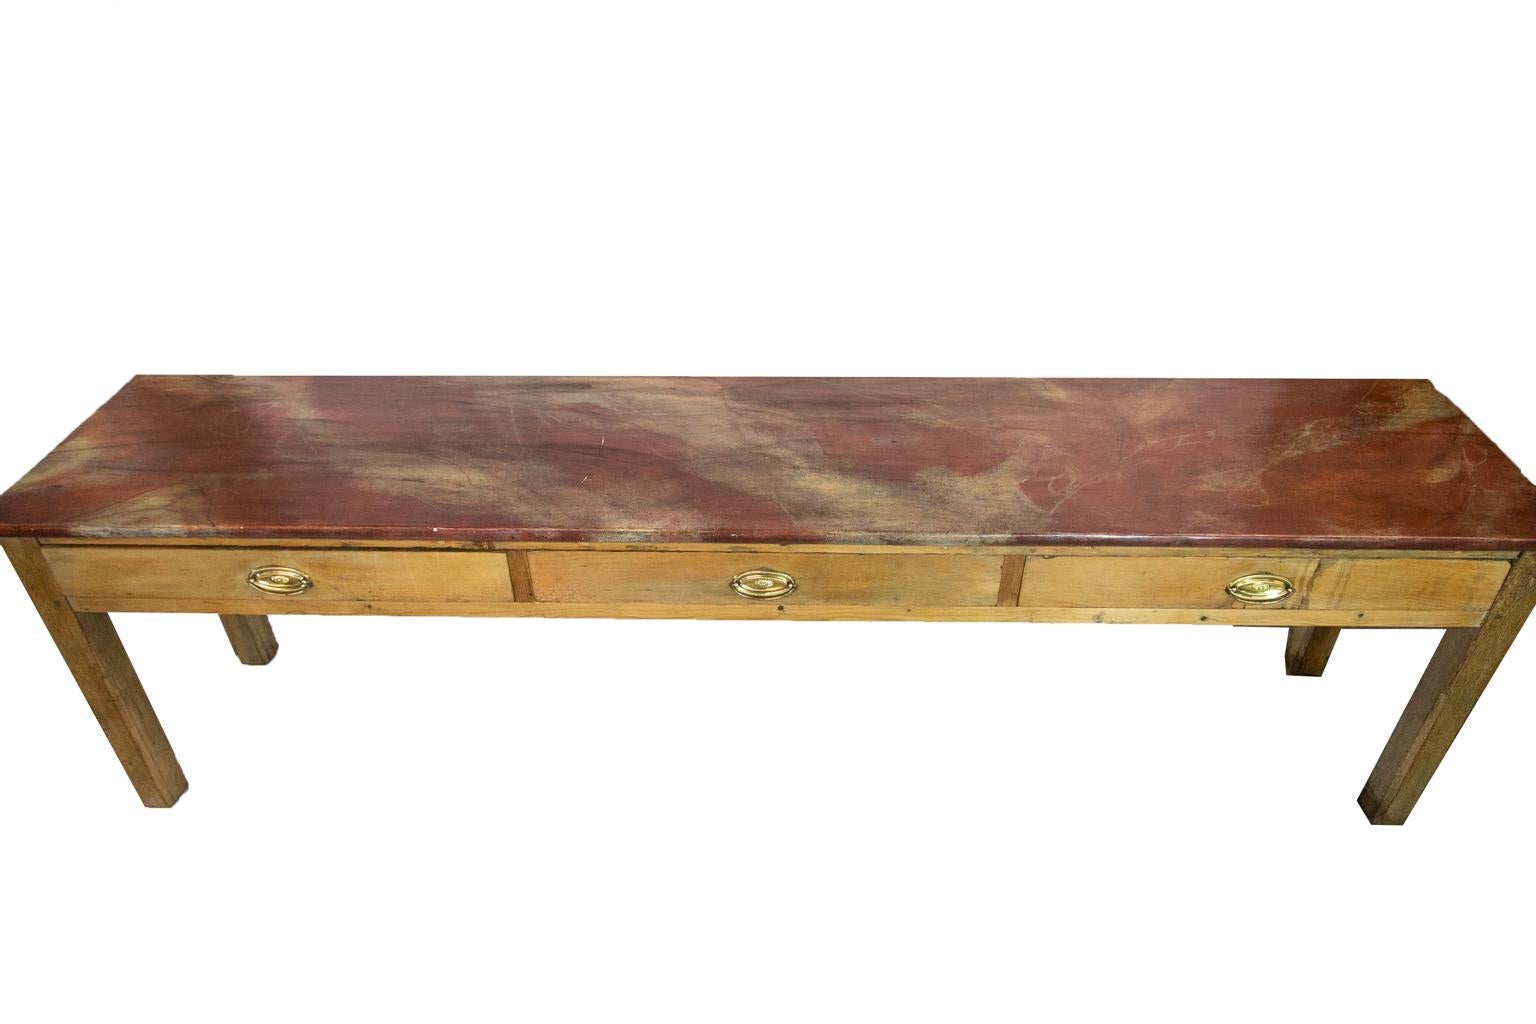 The top of this English pine sideboard/serving table was faux patented circa 1980 to resemble Rojo Alicante marble. The legs are made of oak with exposed double peg construction and have pencil post chamfers on all four sides.
 